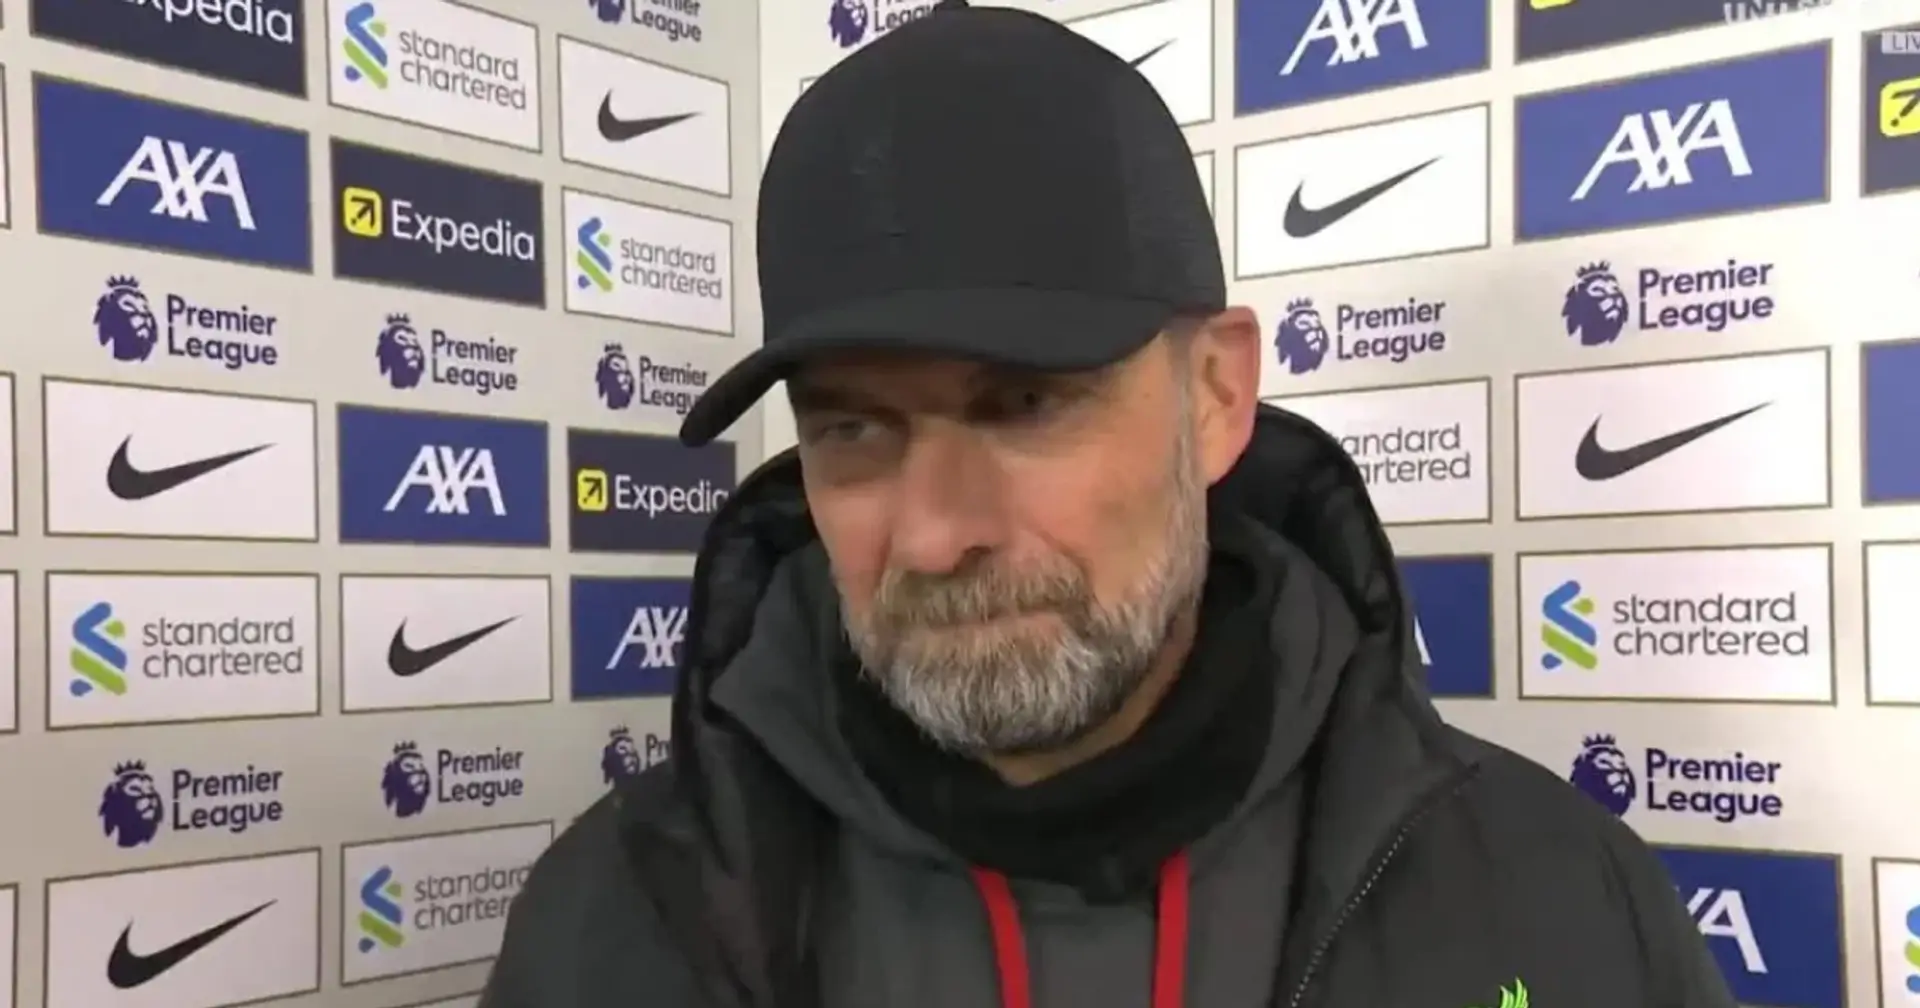 'We knew what we had to do': Jurgen Klopp on changing Burnley game at half-time